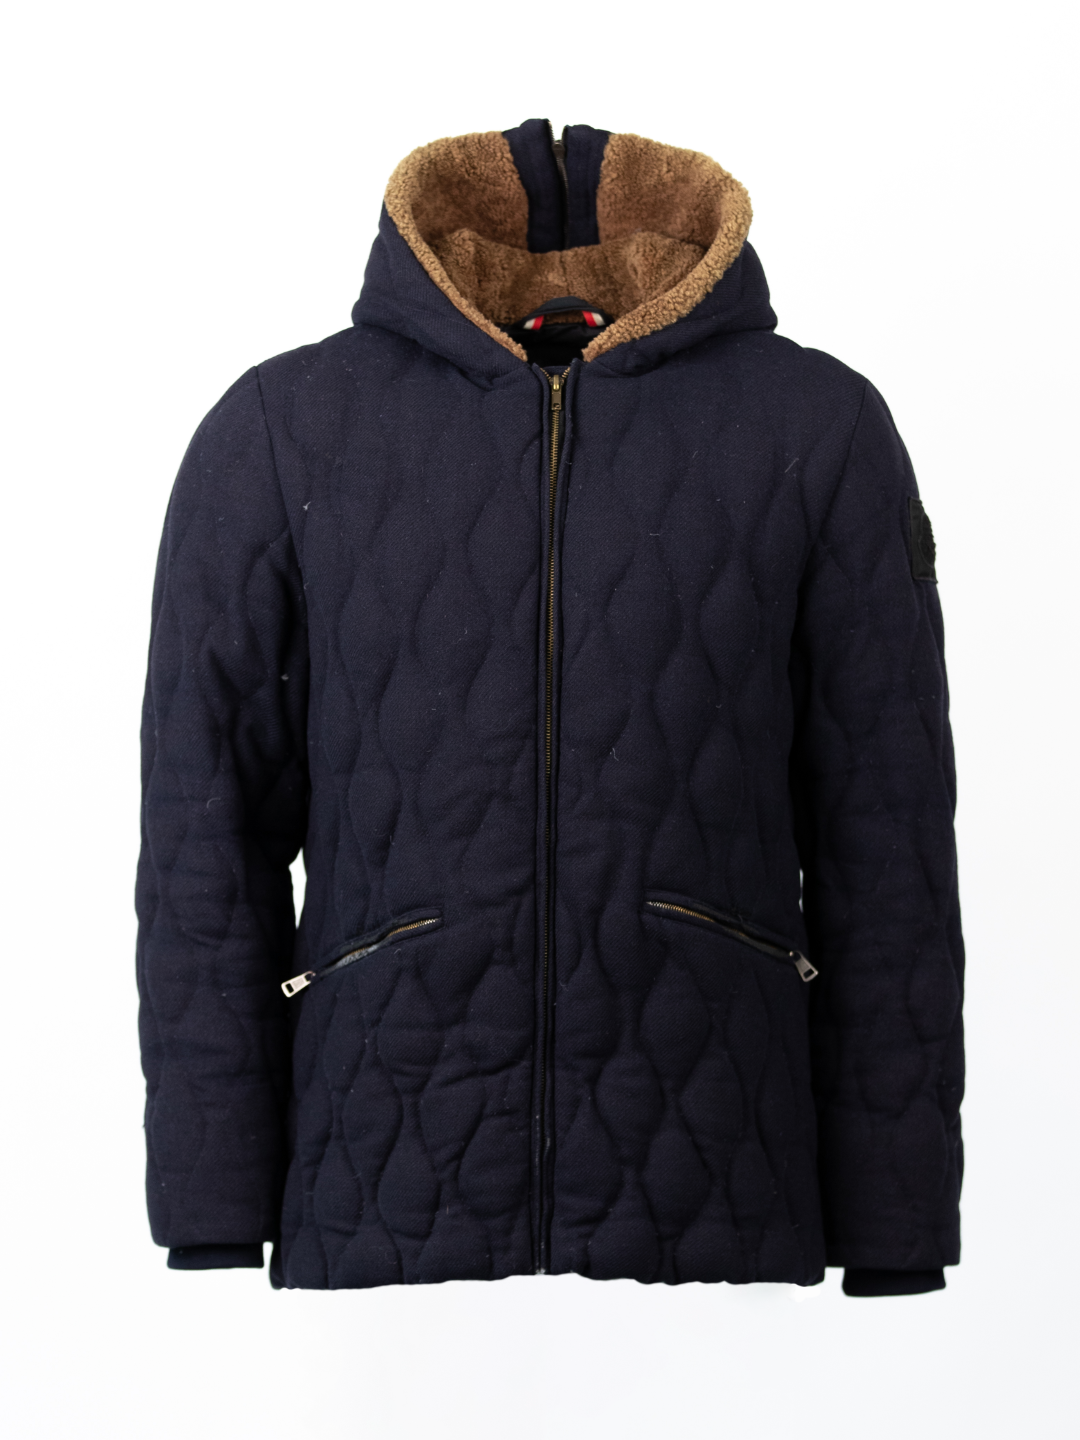 Quilted Navy Blue Jacket